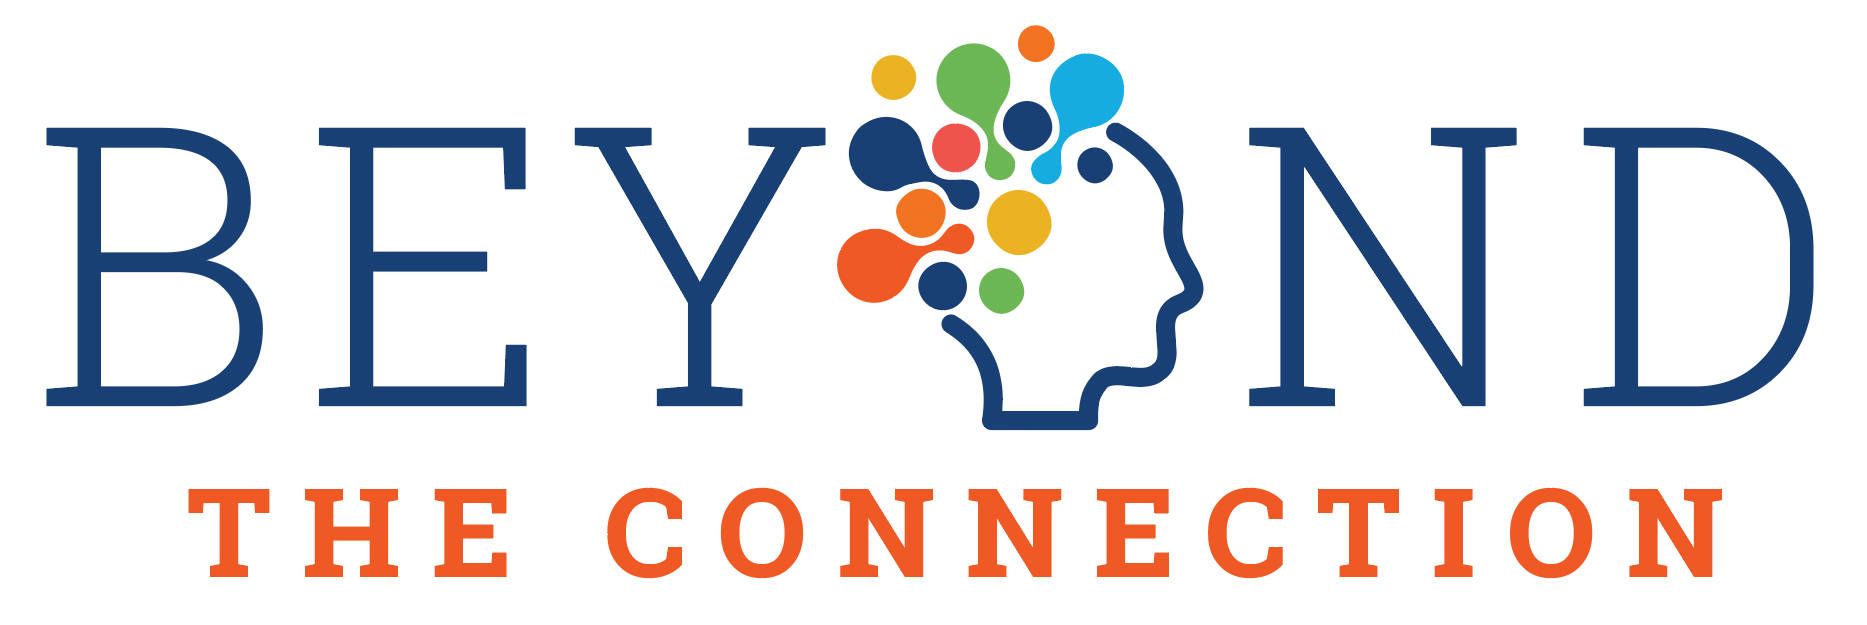 new Make The Connection logo in orange and navy